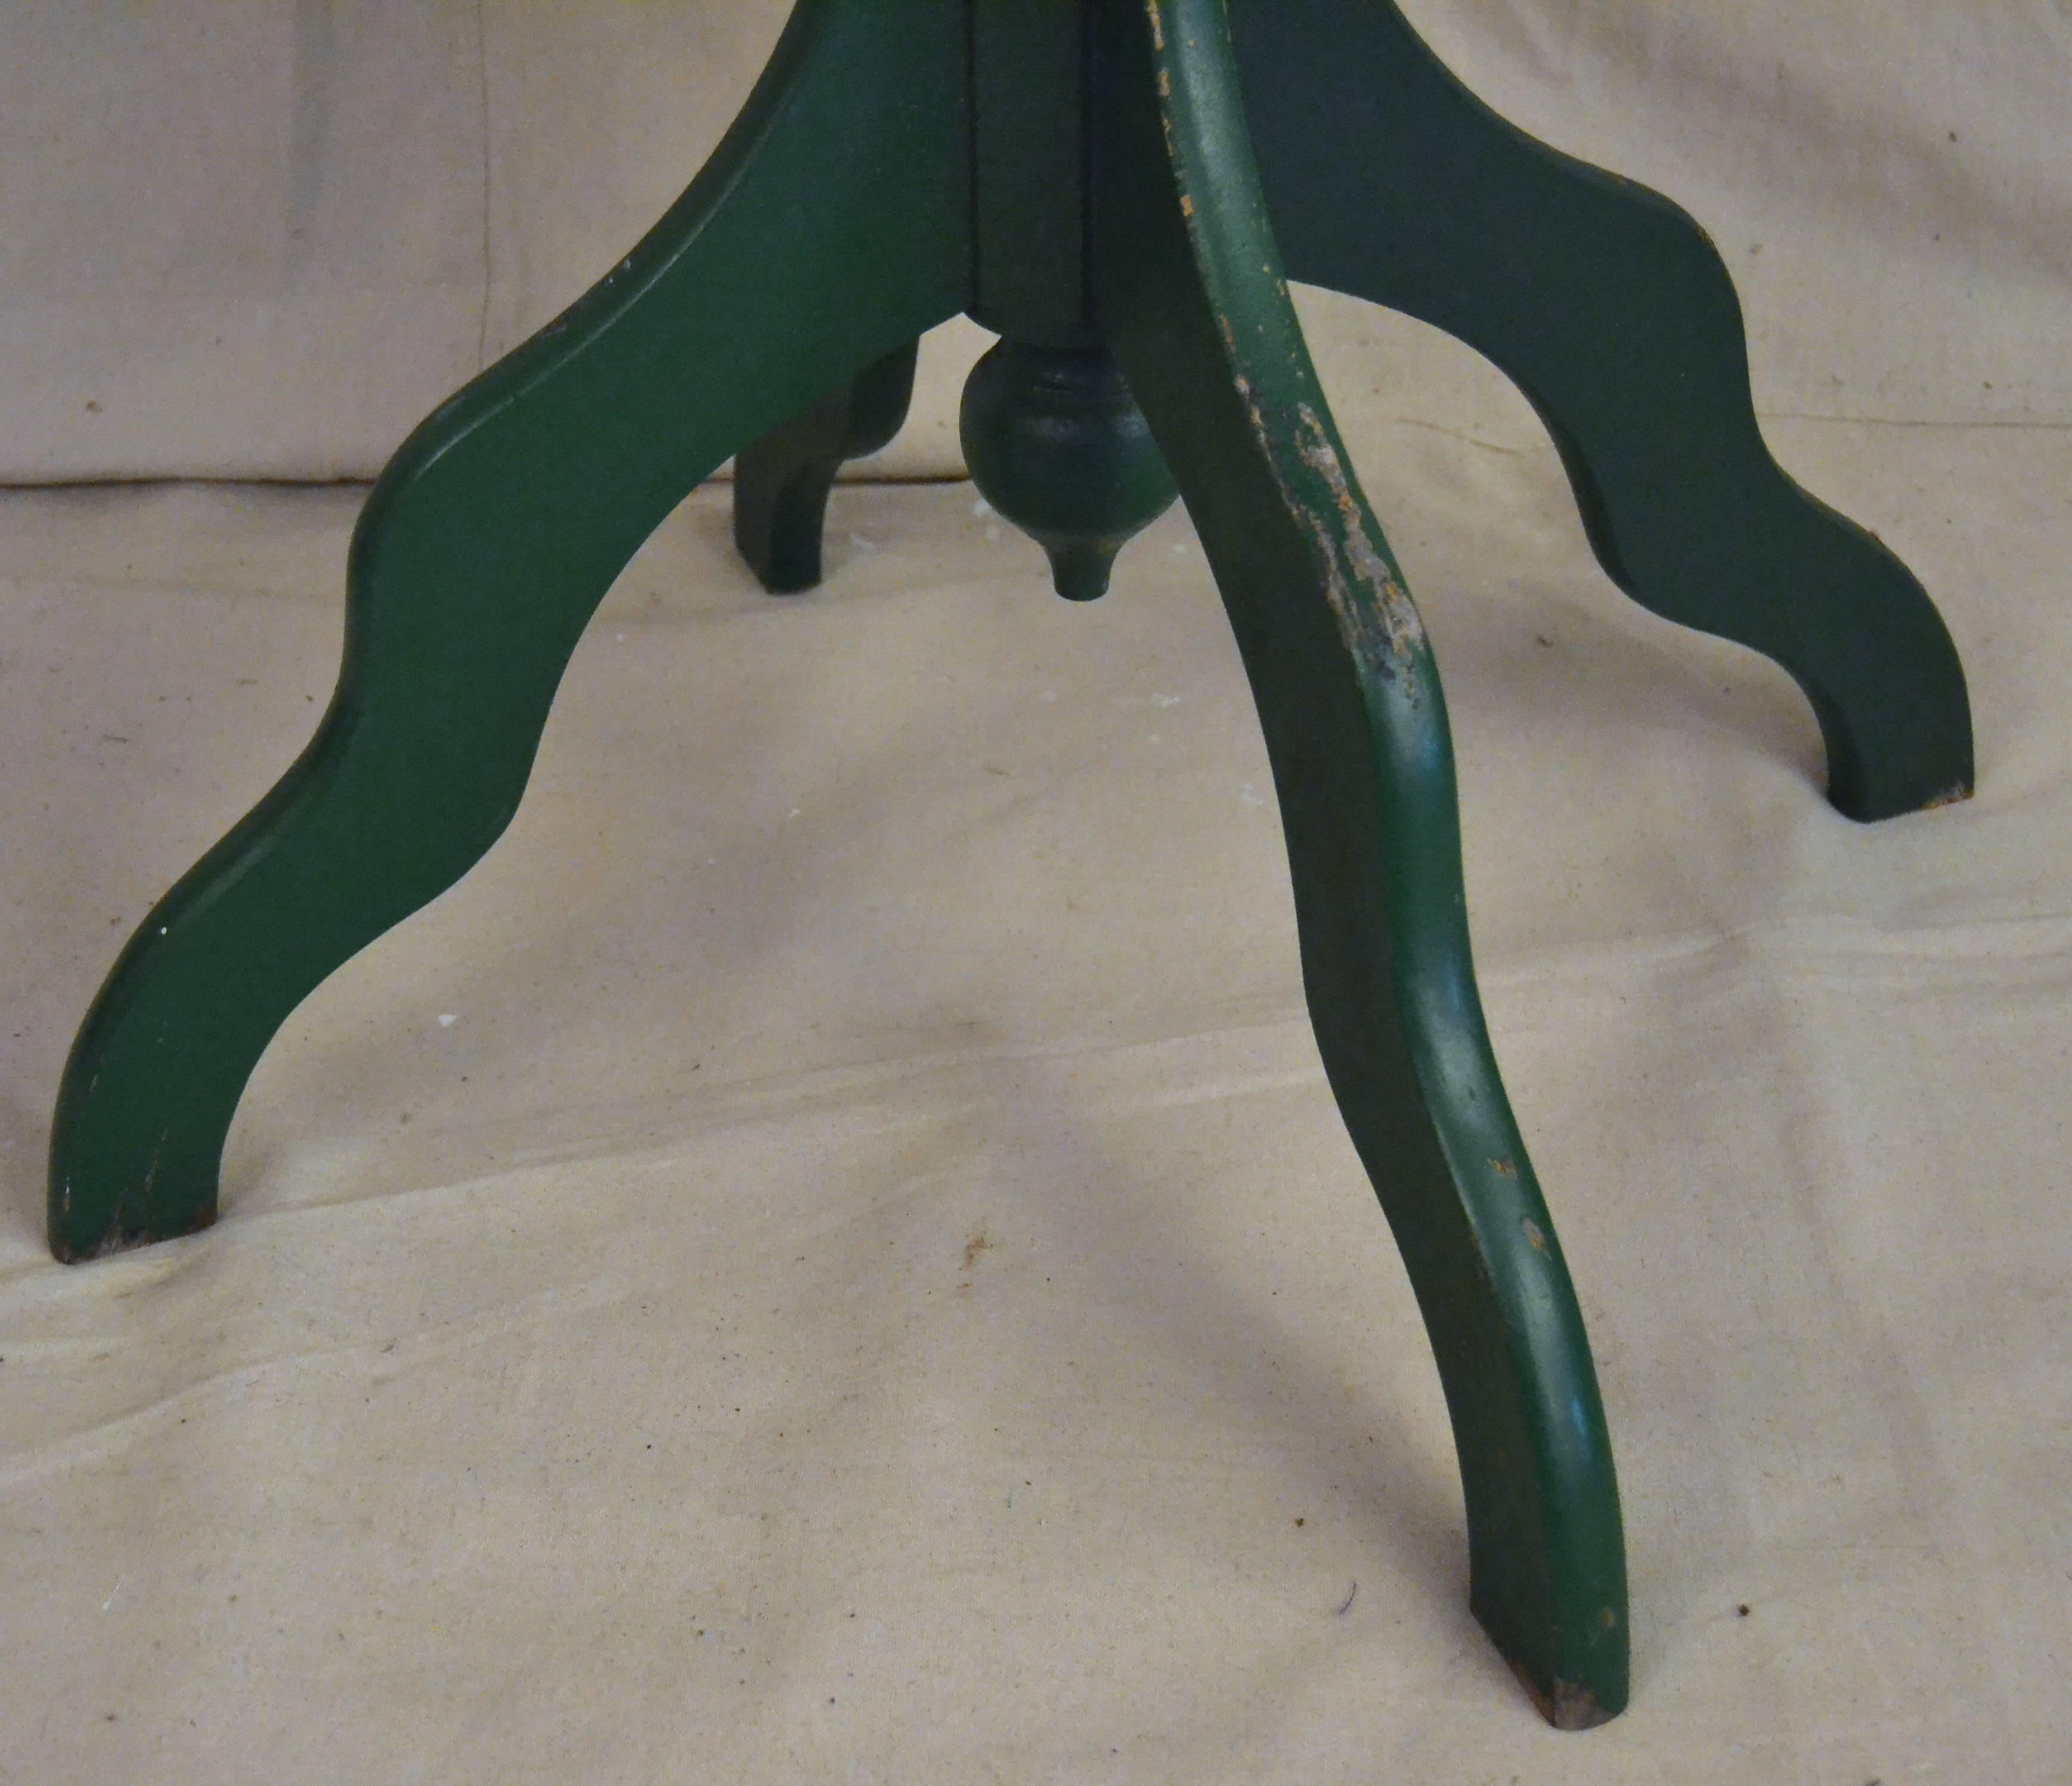 Green painted table with shapely legs and a turned acorn finial. Good proportions and sturdy construction make this graceful and sculptural table especially useful. From a Southern Berkshire County estate and likely made in Berkshire County